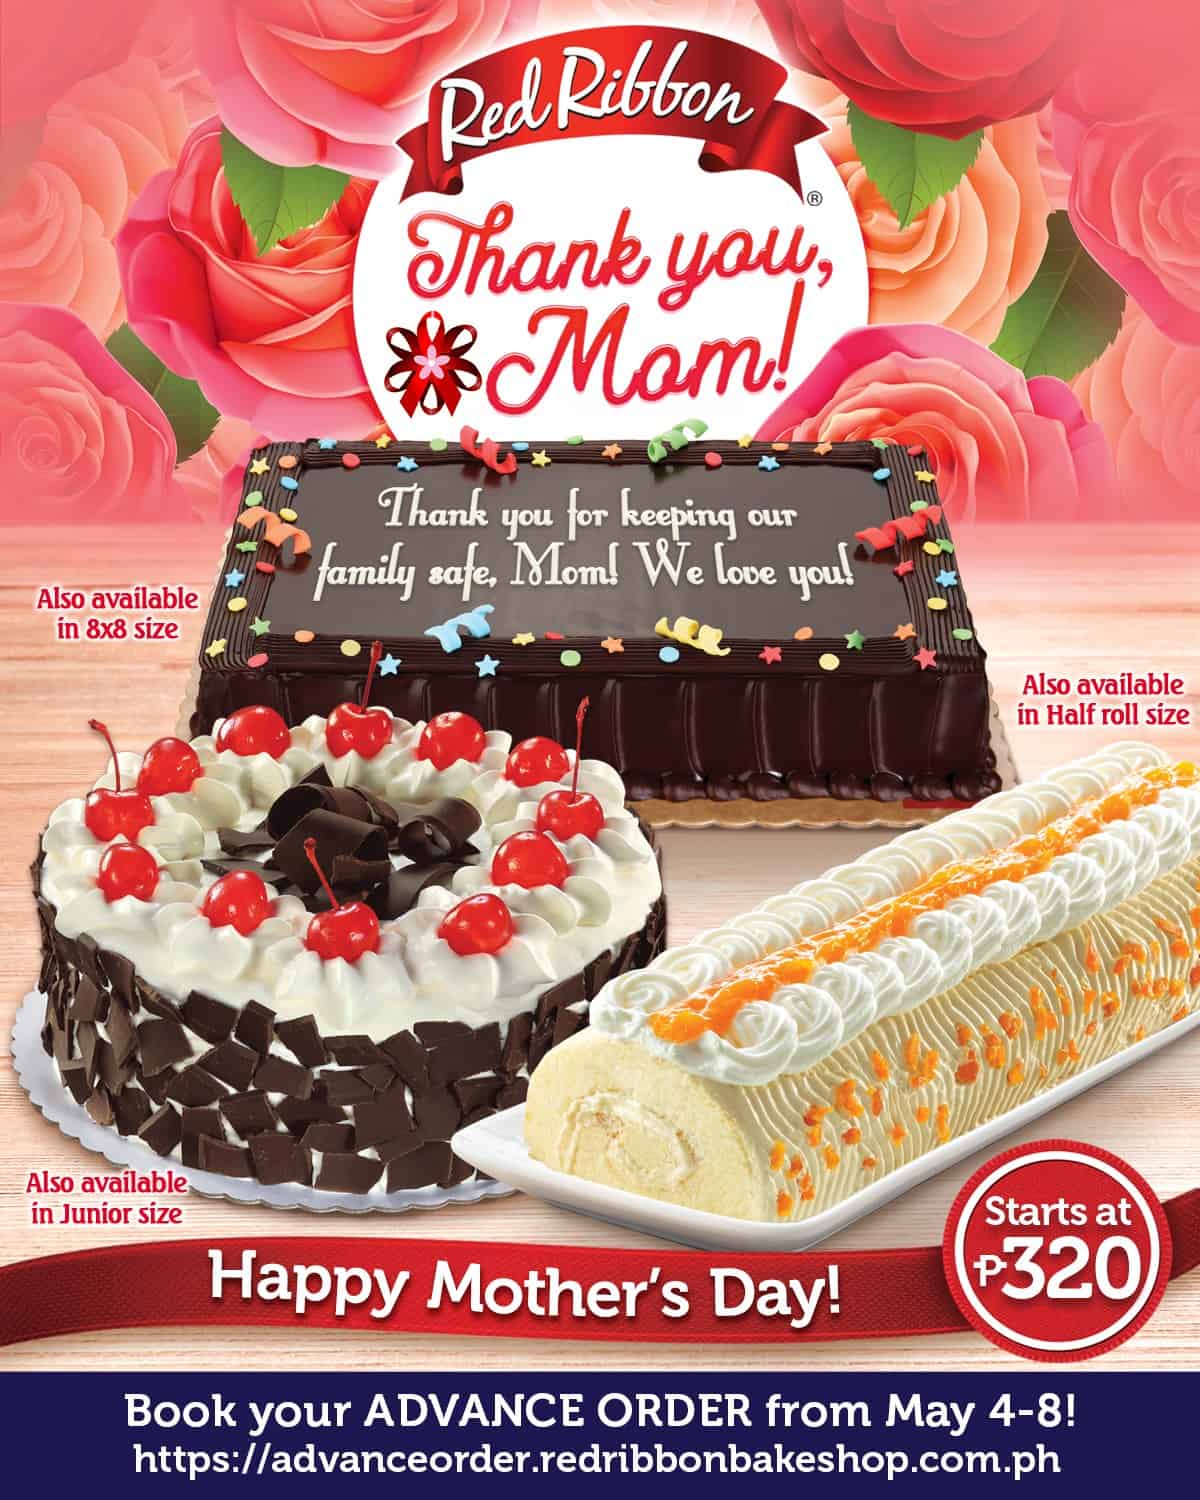 GOLDILOCKS Satisfies My Sweet Tooth with Cakes by the Crate on National Cake  Day | Rolled Into One Mom